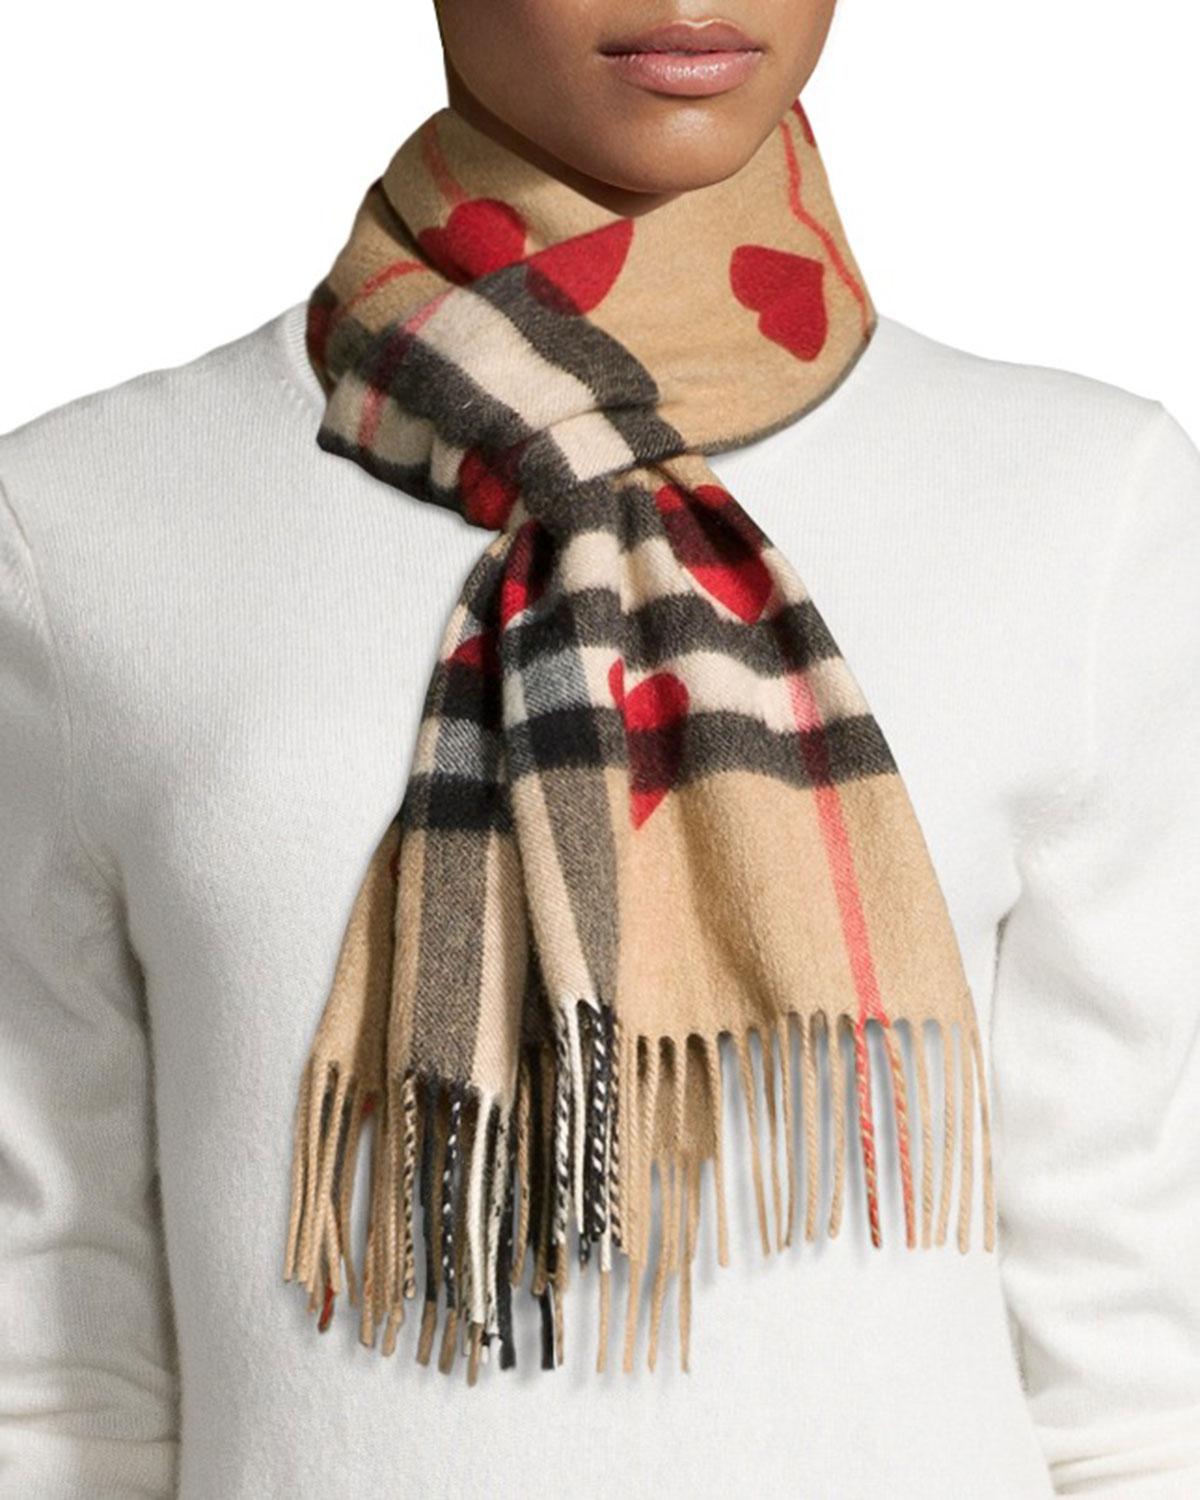 burberry red heart scarf